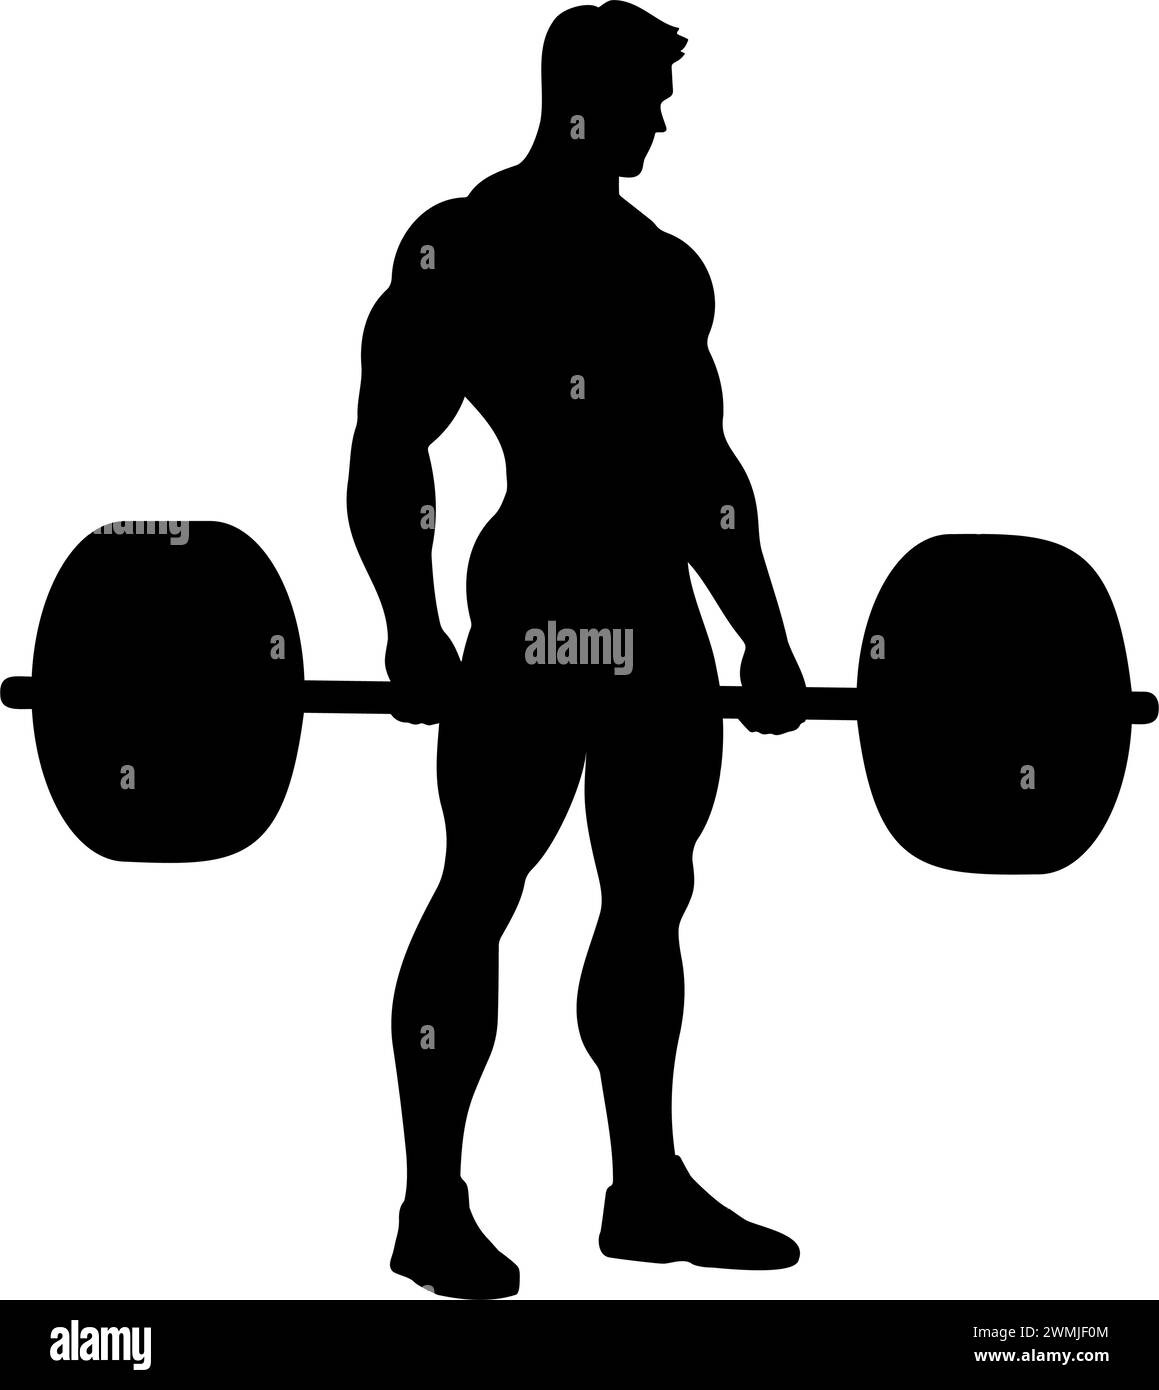 Bodybuilder Lifting a Barbell Silhouette. vector illustration Stock Vector